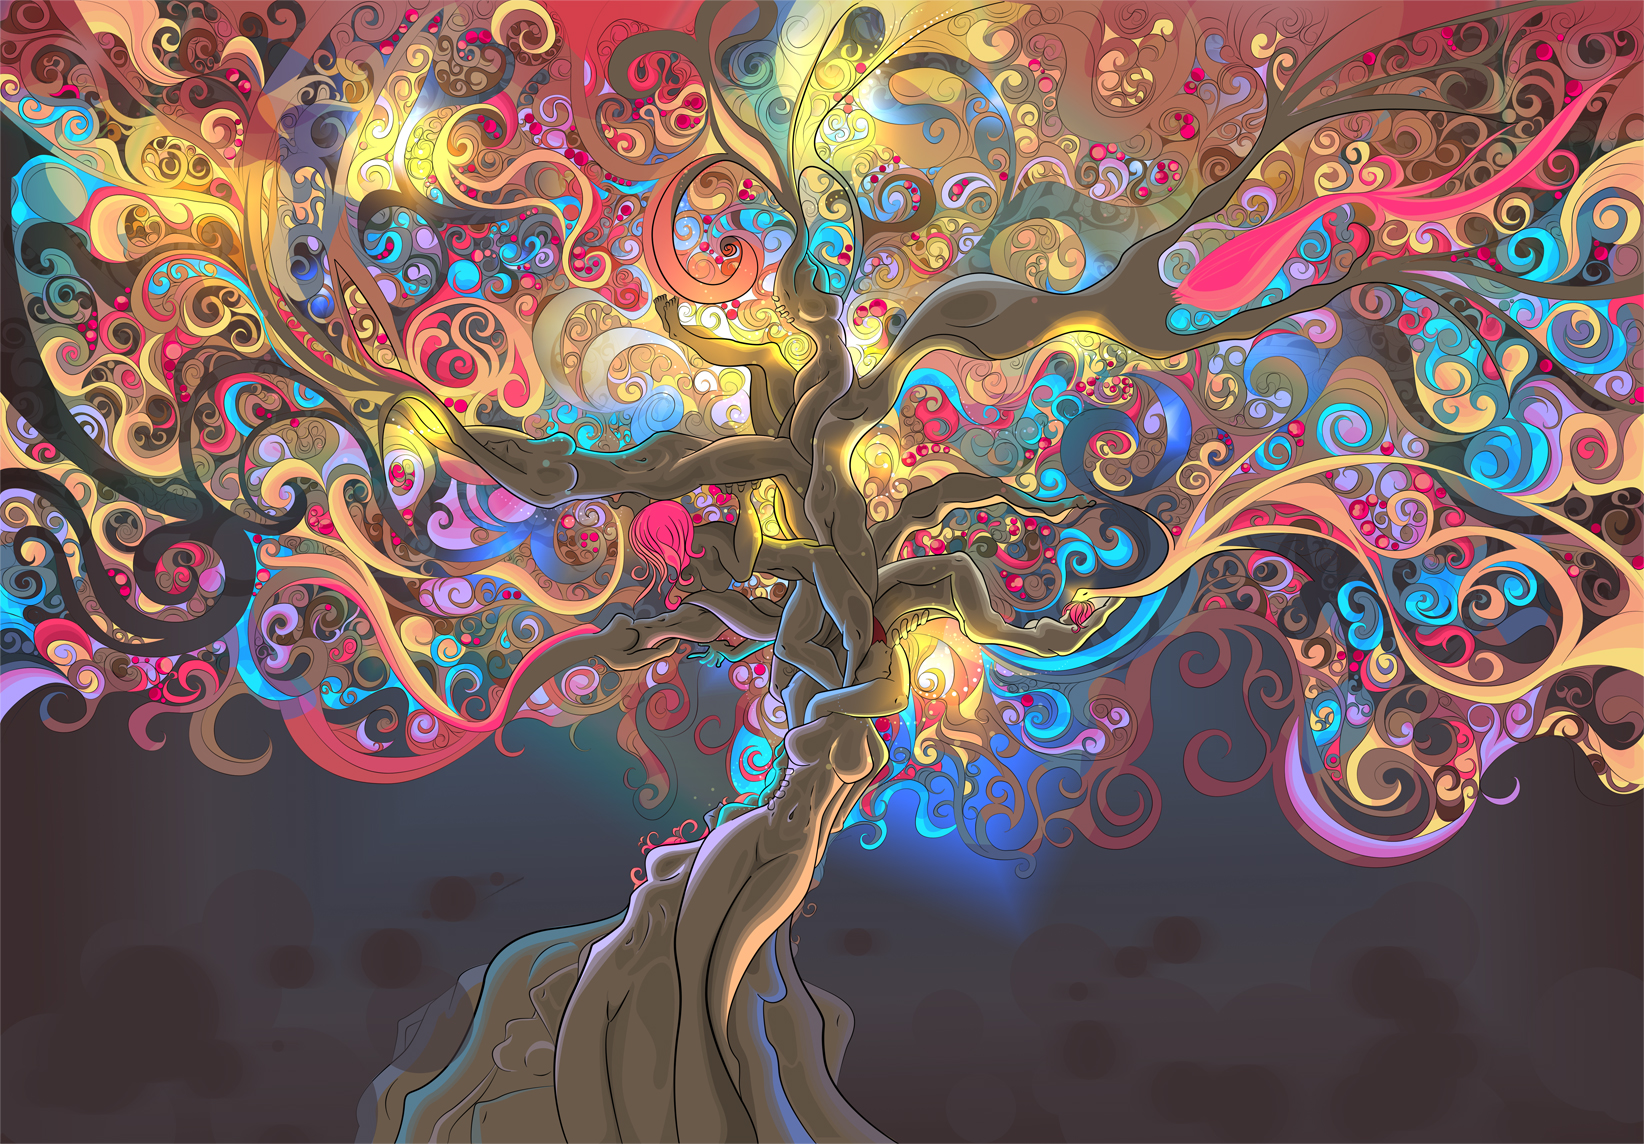 cool trippy wallpapers,psychedelic art,art,tree,graphic design,modern art